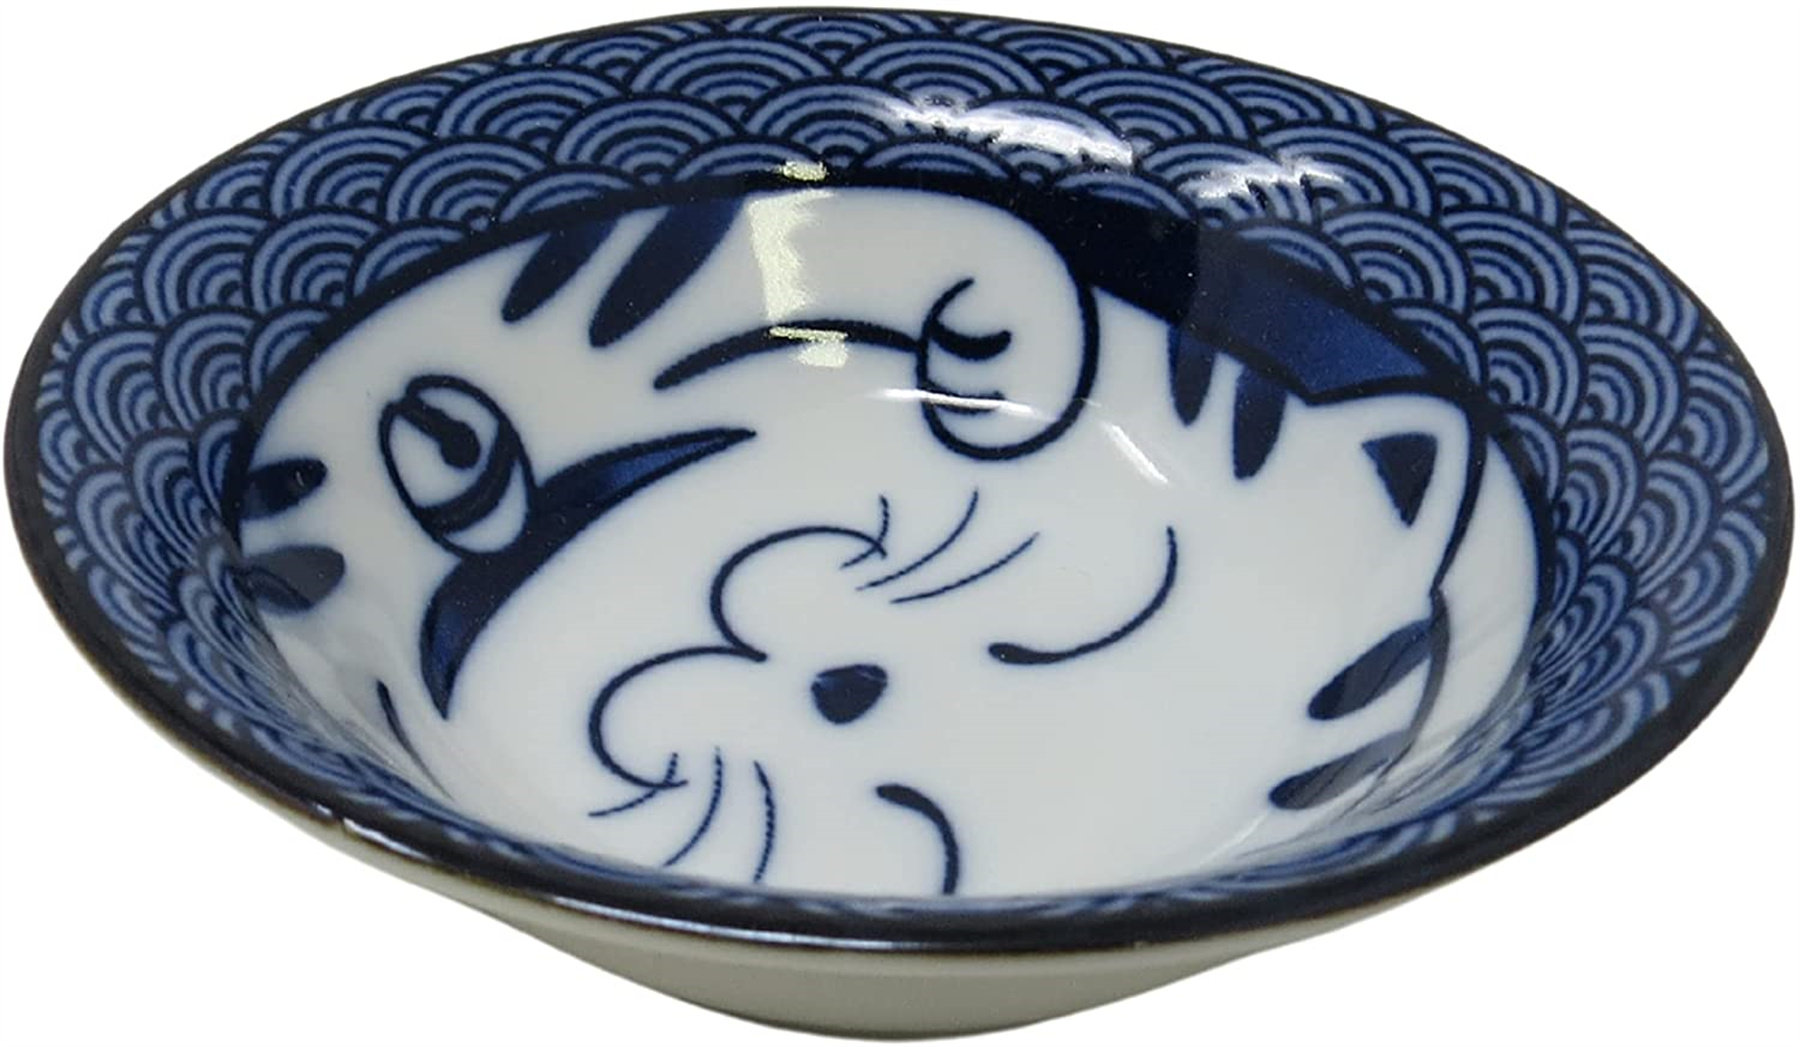 Red Barrel Studio® Cute Japanese Kitchenware Dish, Blue And White ...